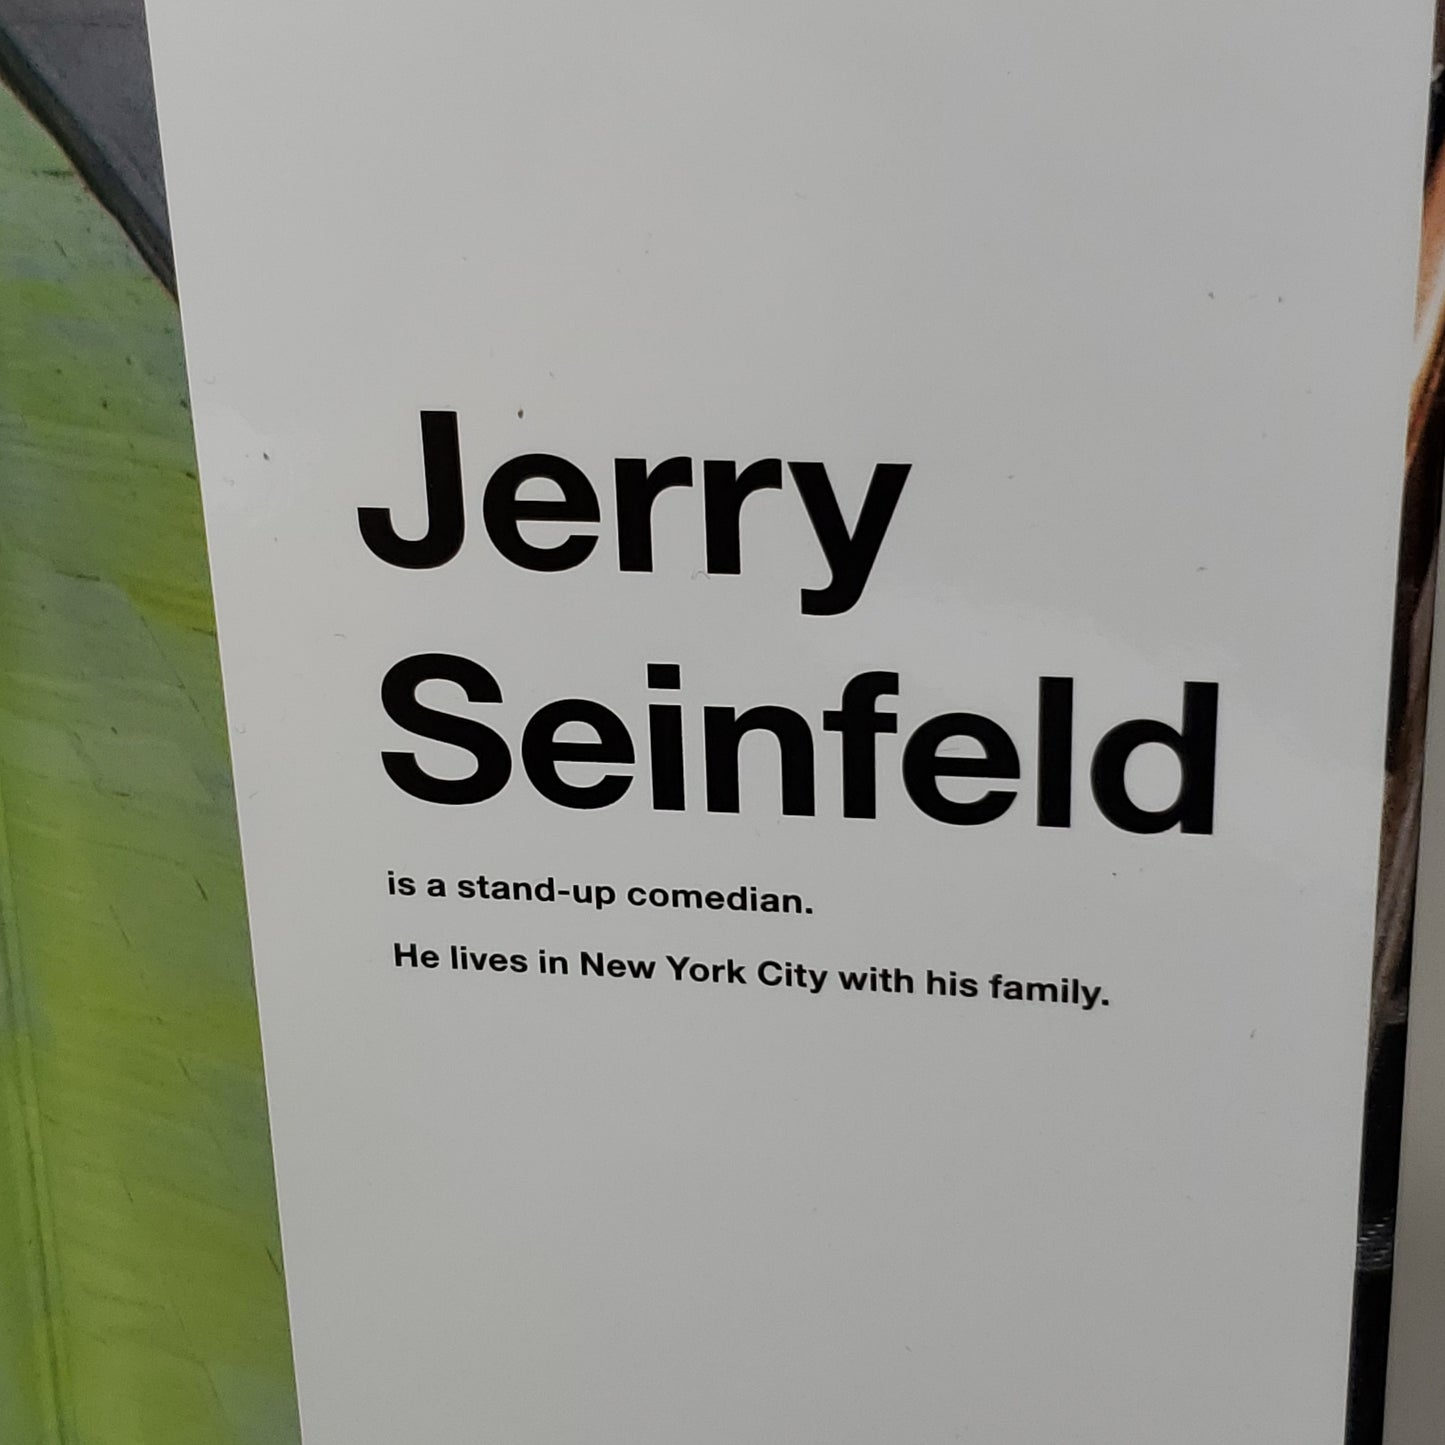 IS THIS ANYTHING? by Jerry Seinfeld Book Hardback (New Other)